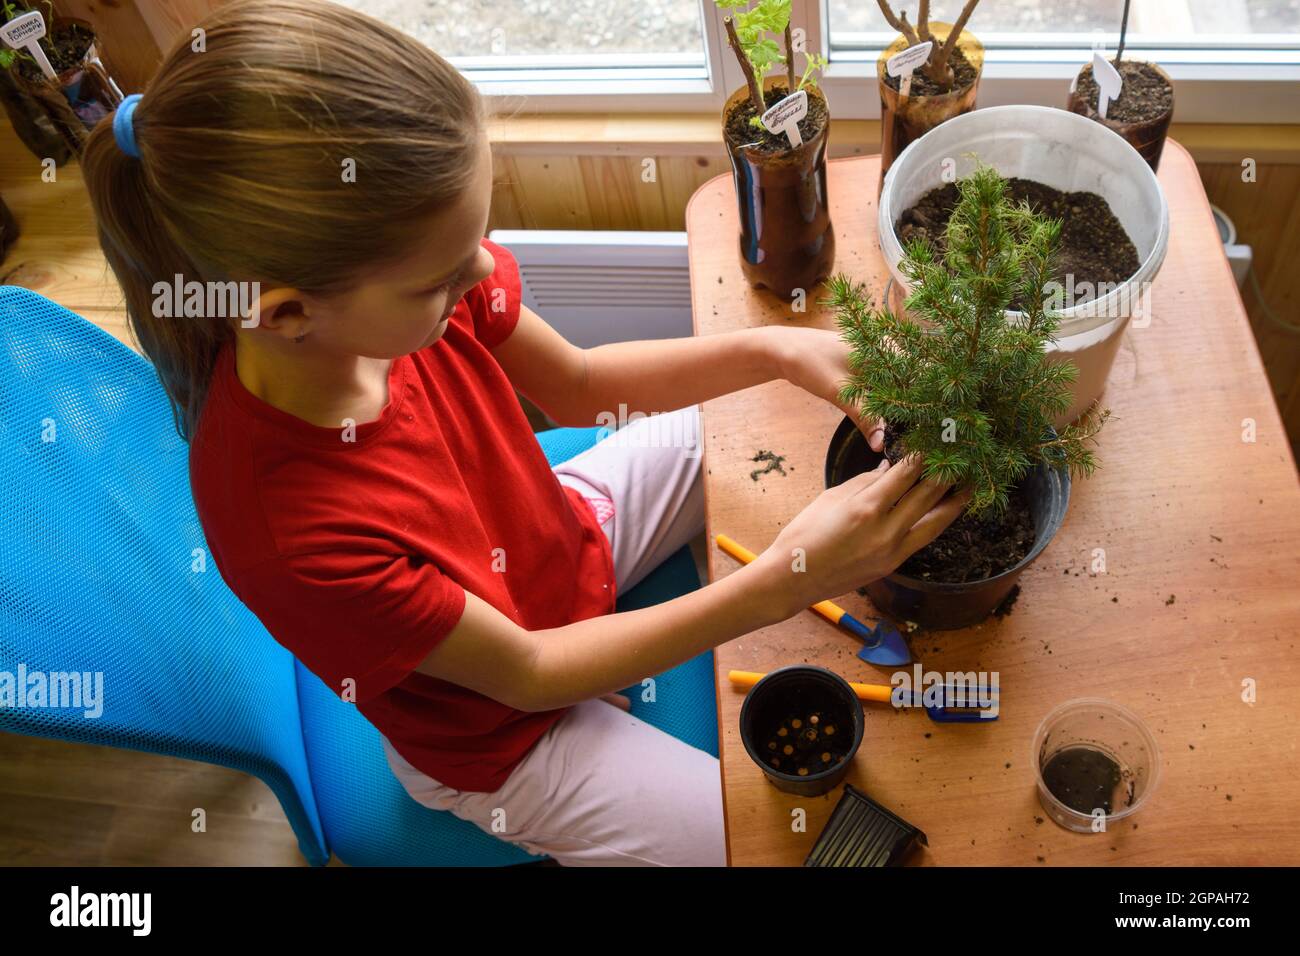 A girl transplants a spruce seedling at a table by the window, top view Stock Photo